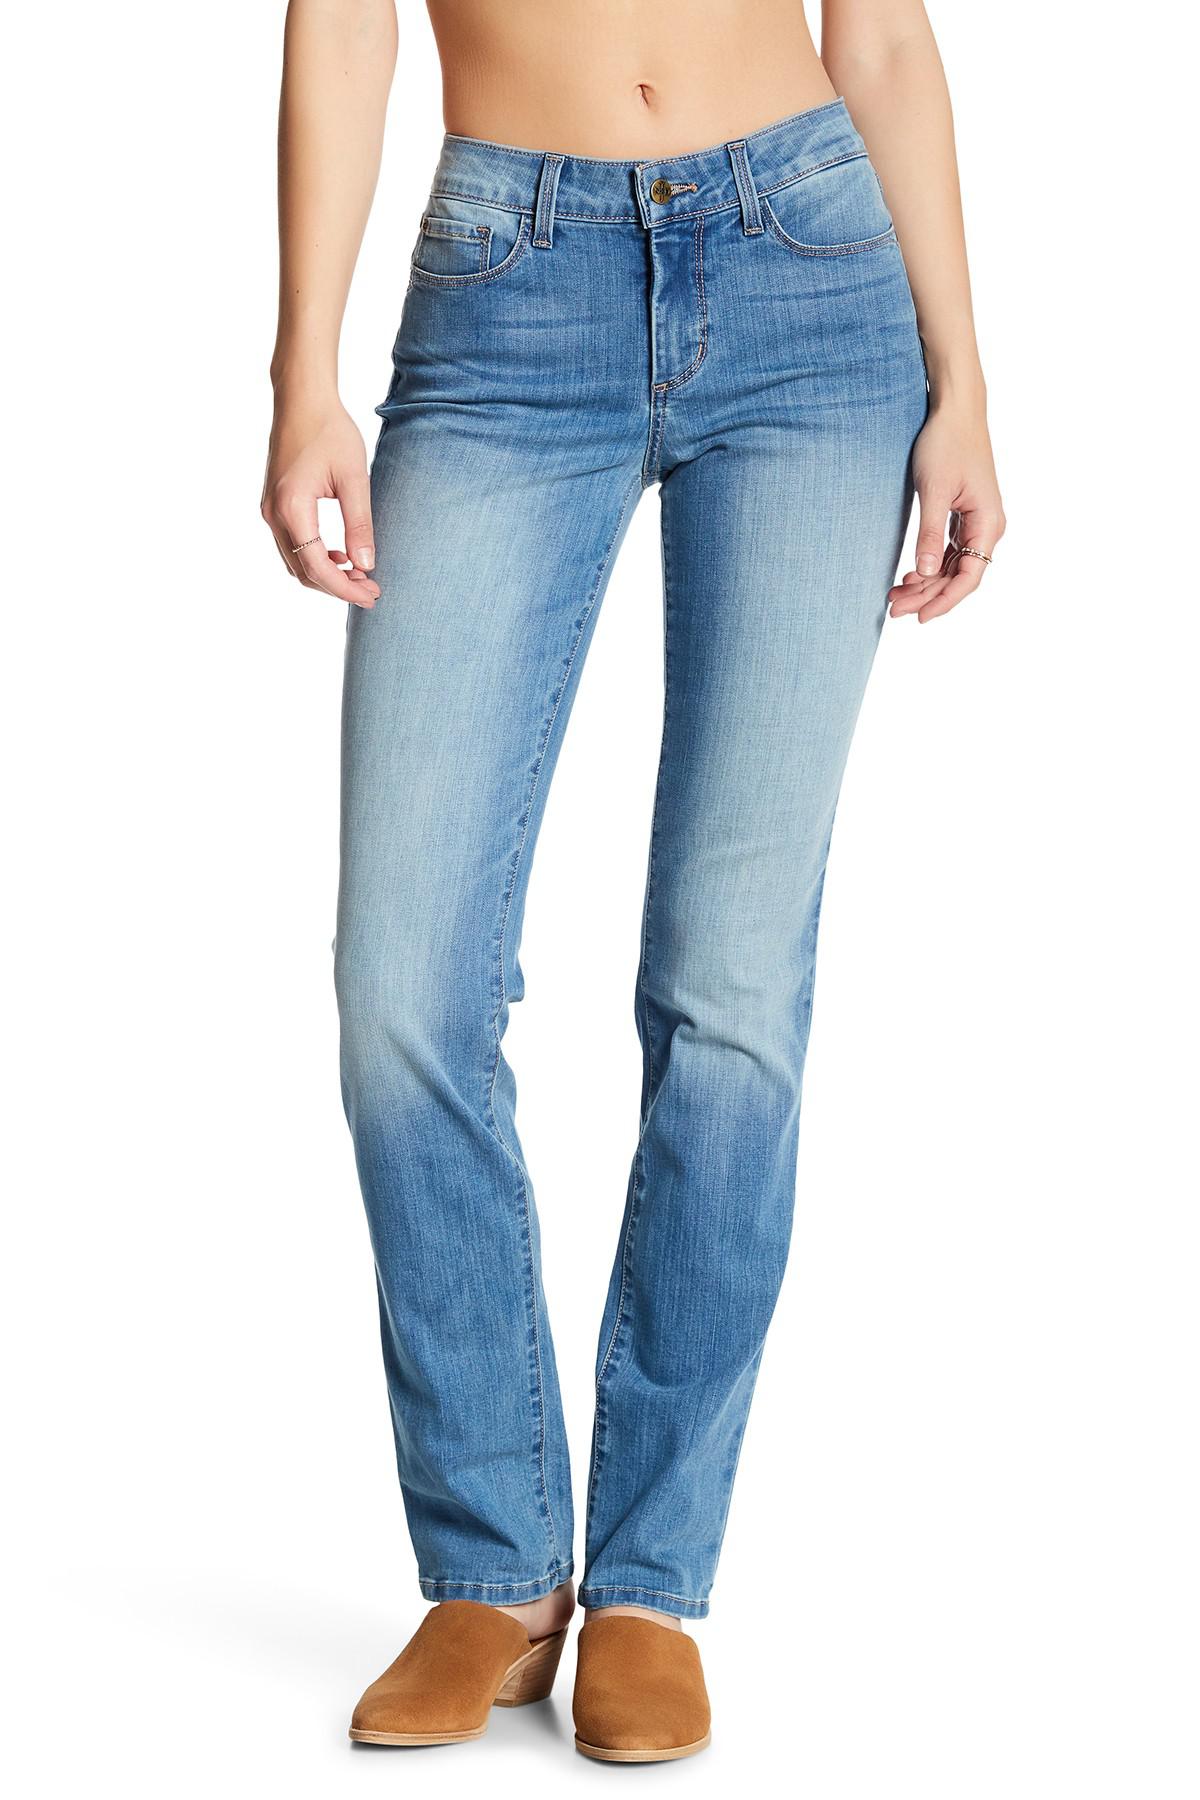 Lyst - Nydj Sheri Faded Whiskered Slim Fit Jeans in Blue